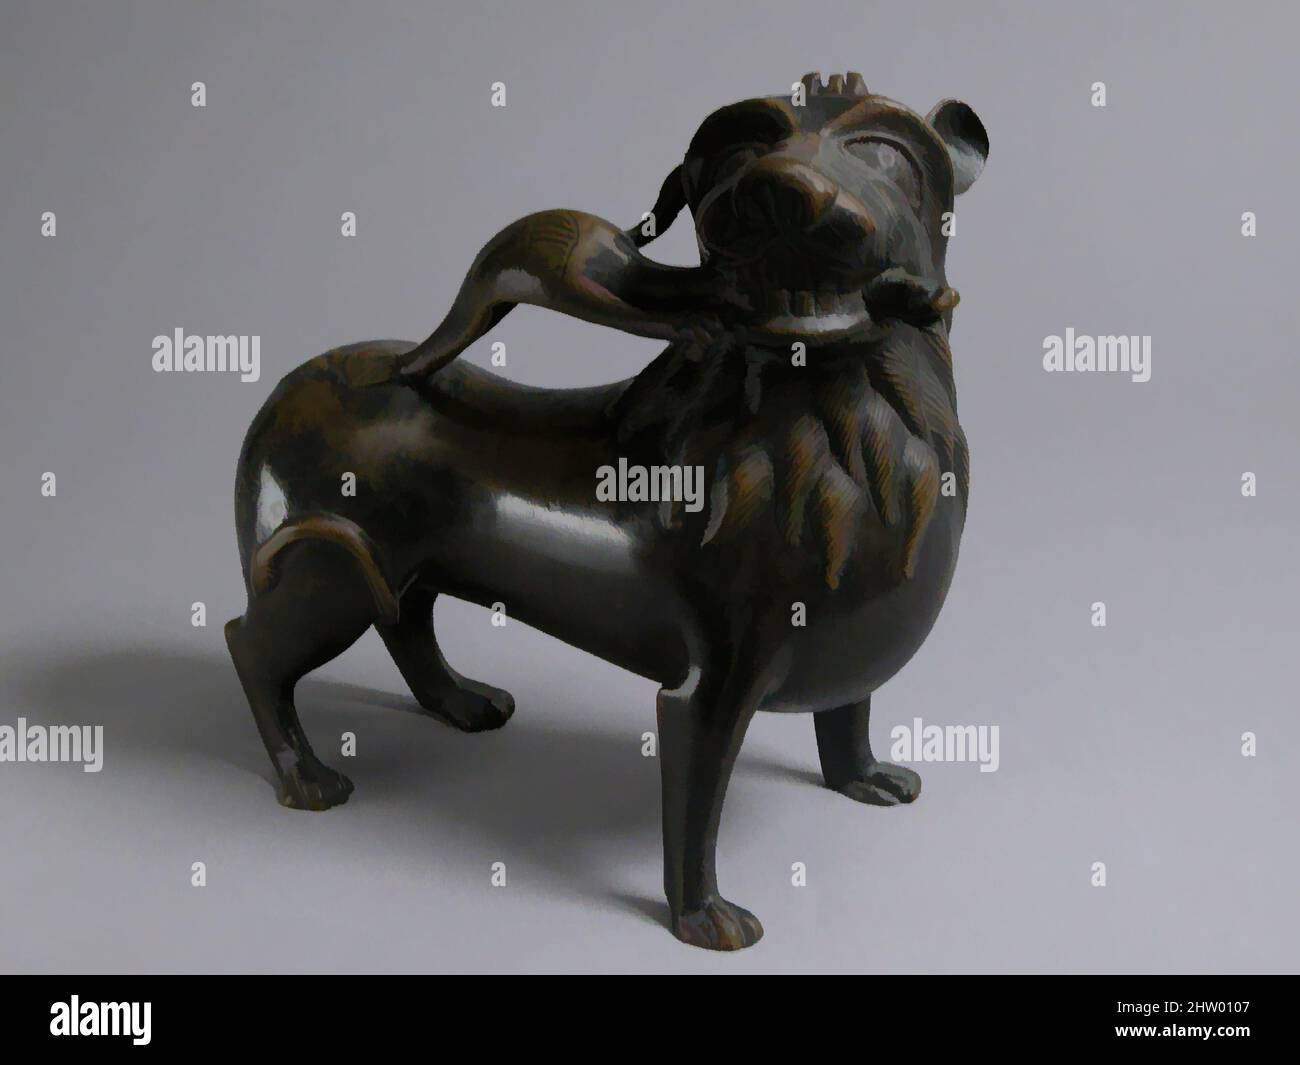 Art inspired by Aquamanile in the Form of a Lion, ca. 1200, North German, Copper alloy, Overall: 9 1/8 x 8 15/16 x 3 3/4 in. (23.2 x 22.7 x 9.5 cm), Metalwork-Copper alloy, This aquamanile is distinguished by the lion’s turned head, which grasps the neck of the dragon in its jaws. The, Classic works modernized by Artotop with a splash of modernity. Shapes, color and value, eye-catching visual impact on art. Emotions through freedom of artworks in a contemporary way. A timeless message pursuing a wildly creative new direction. Artists turning to the digital medium and creating the Artotop NFT Stock Photo